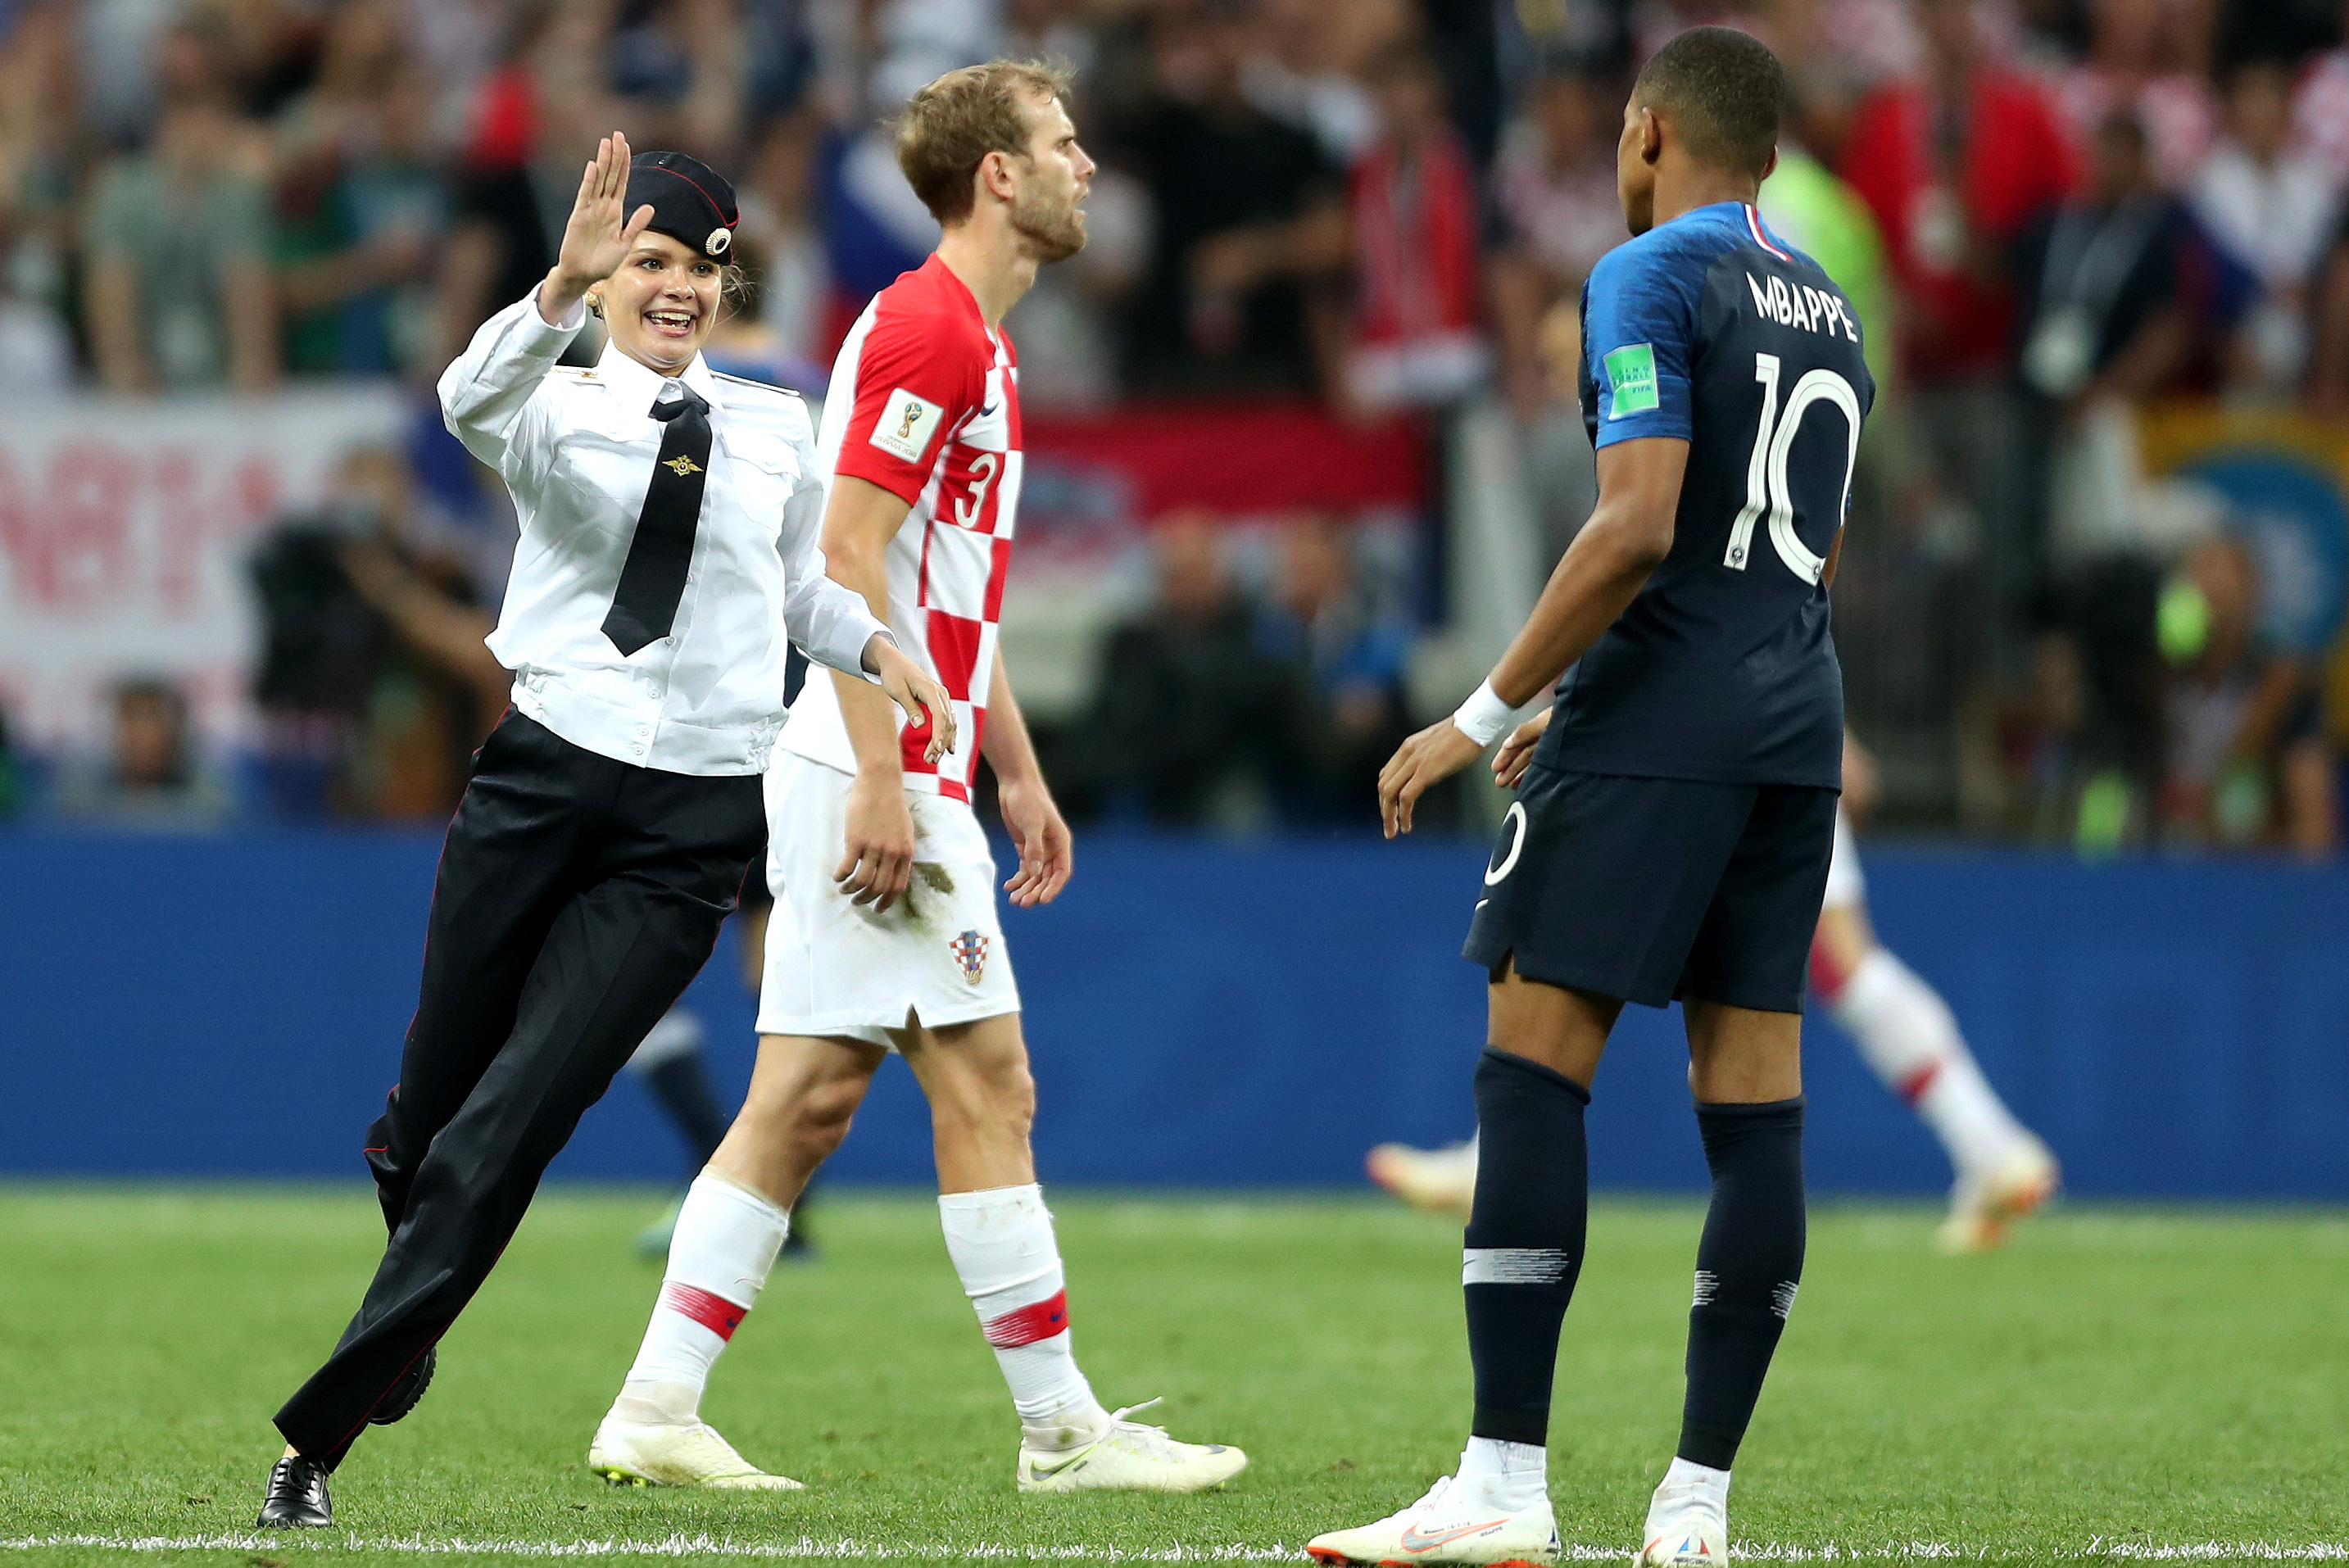 France vs. Croatia World Cup Final Interrupted by 4 Pitch Invaders